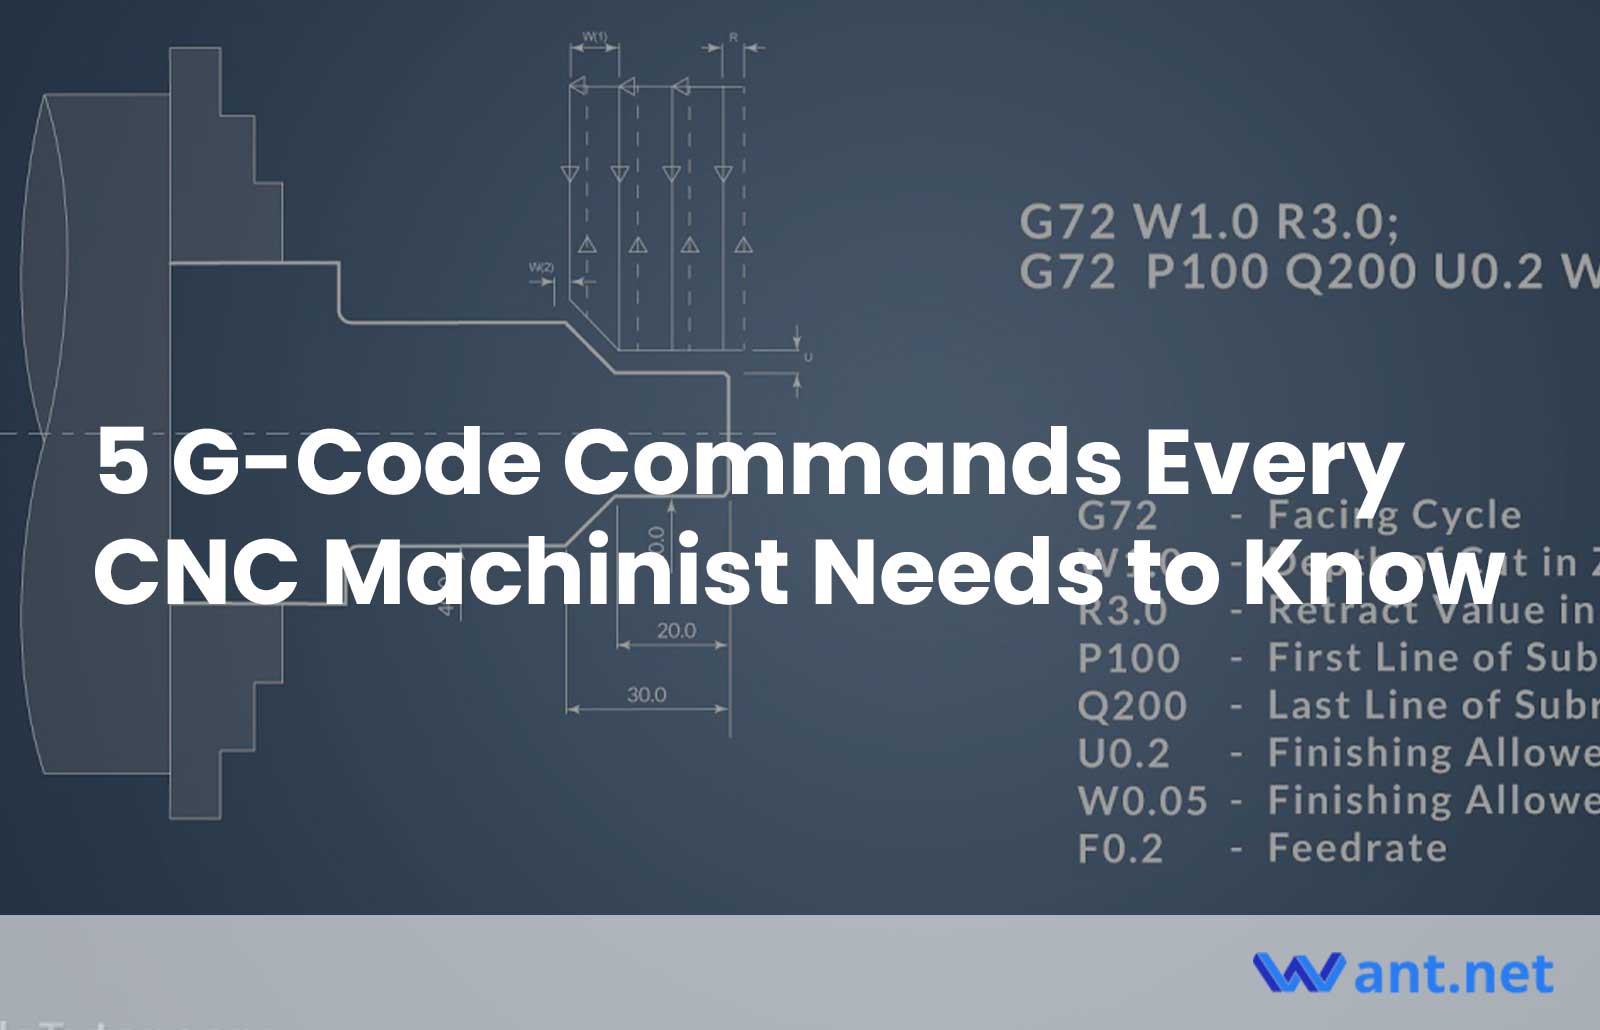 5 G-Code Commands Every CNC Machinist Needs to Know